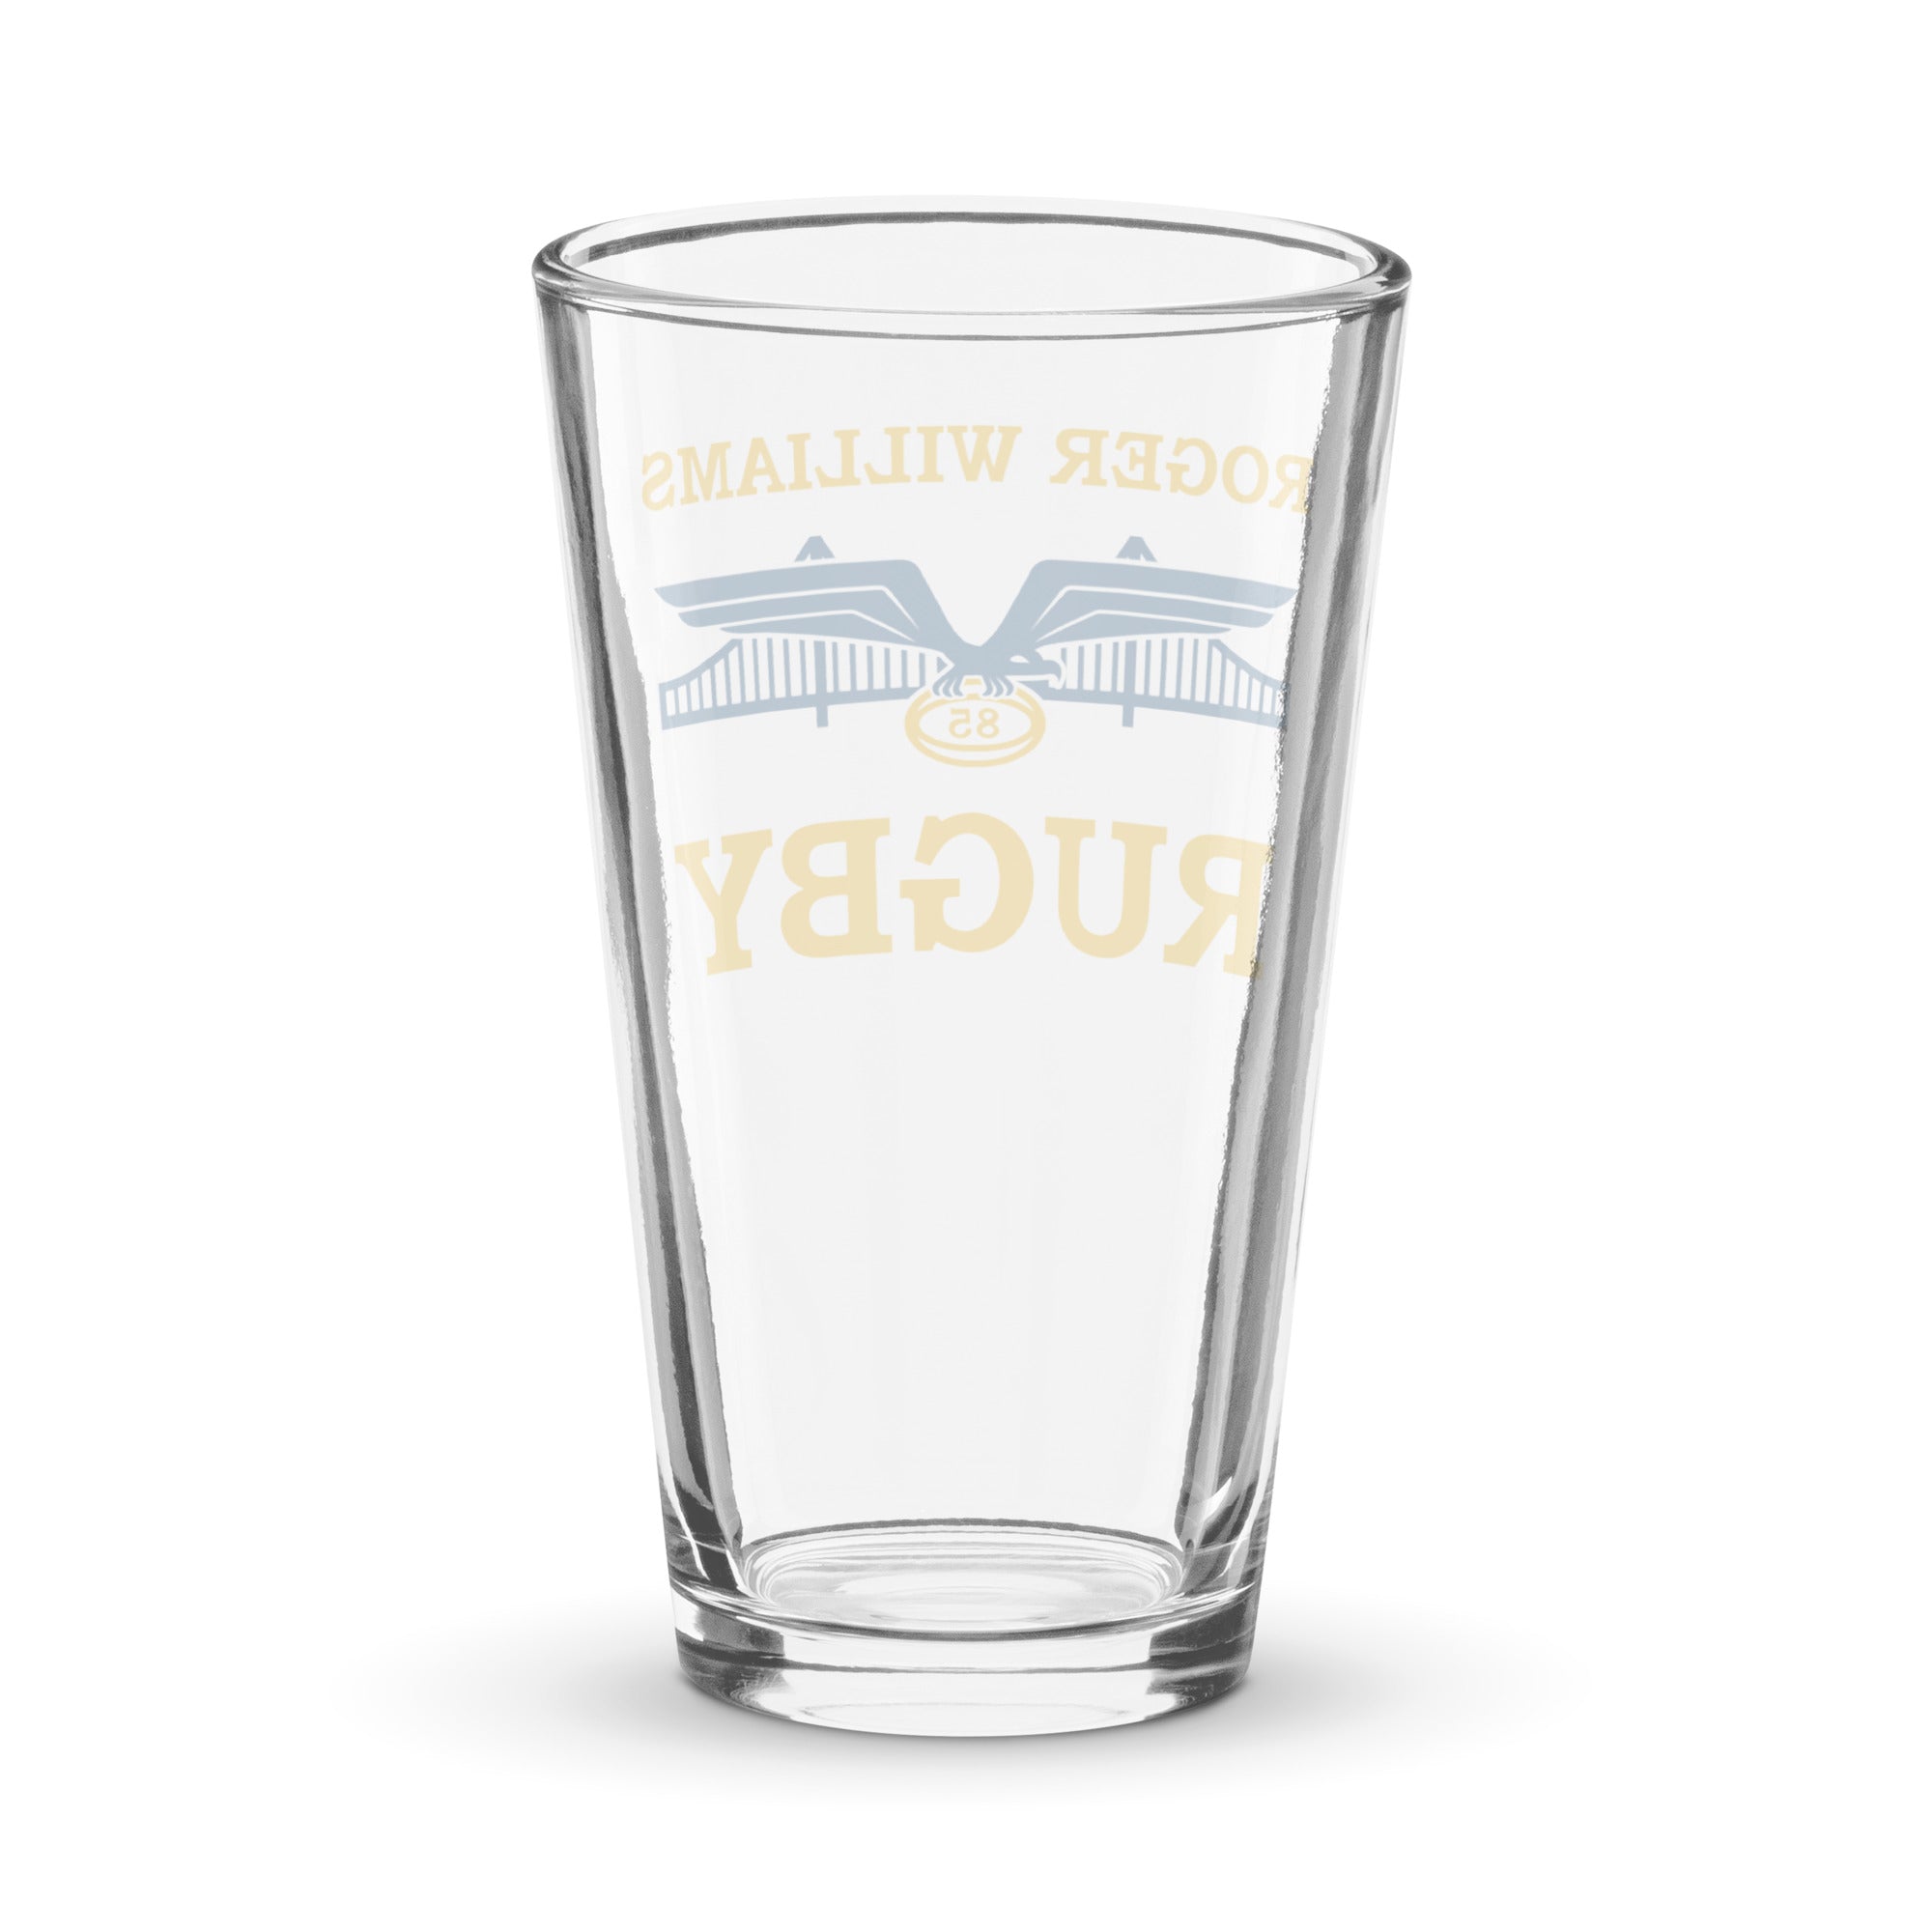 Rugby Imports Roger Williams RFC Pint Glass